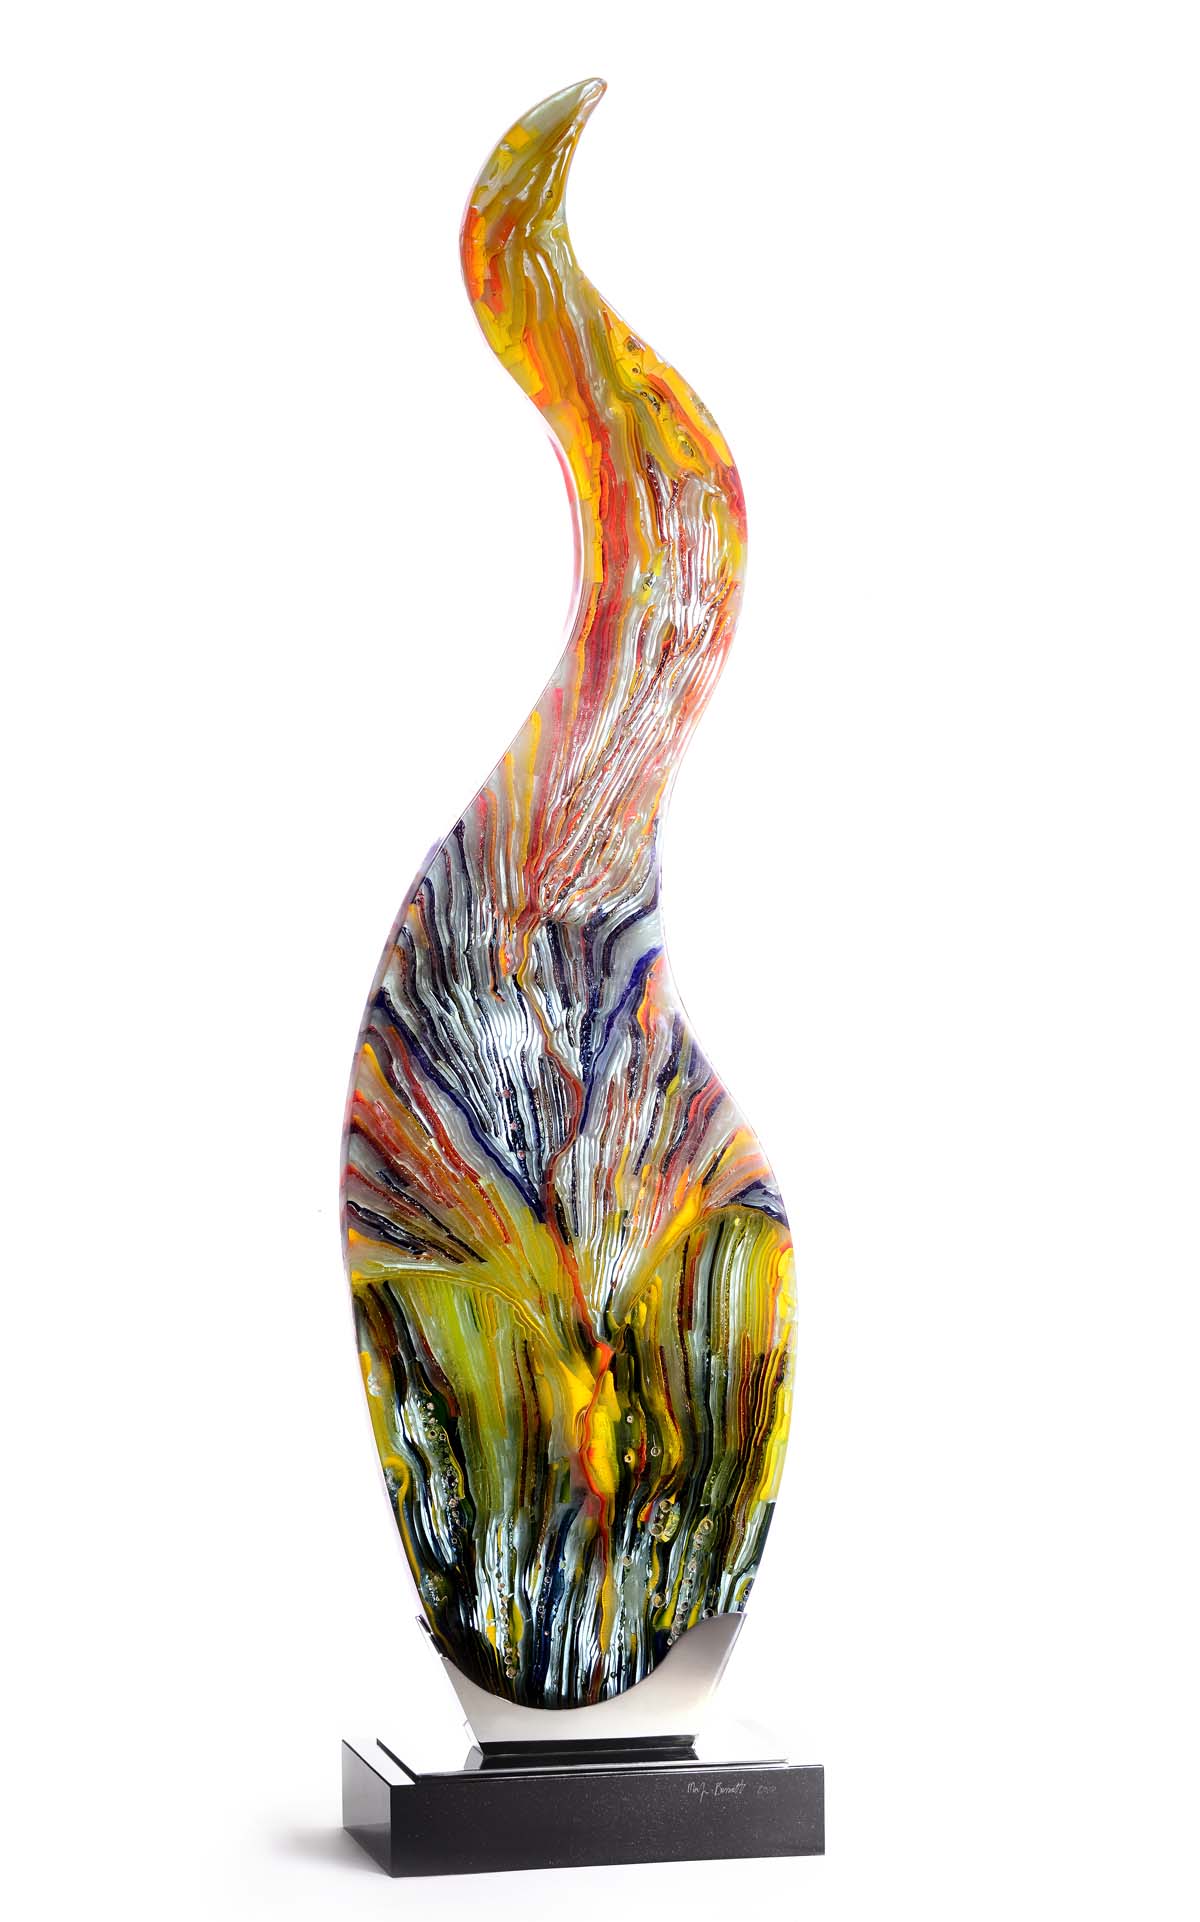 Glass Sculptures - Glass Blowing & Glass Works